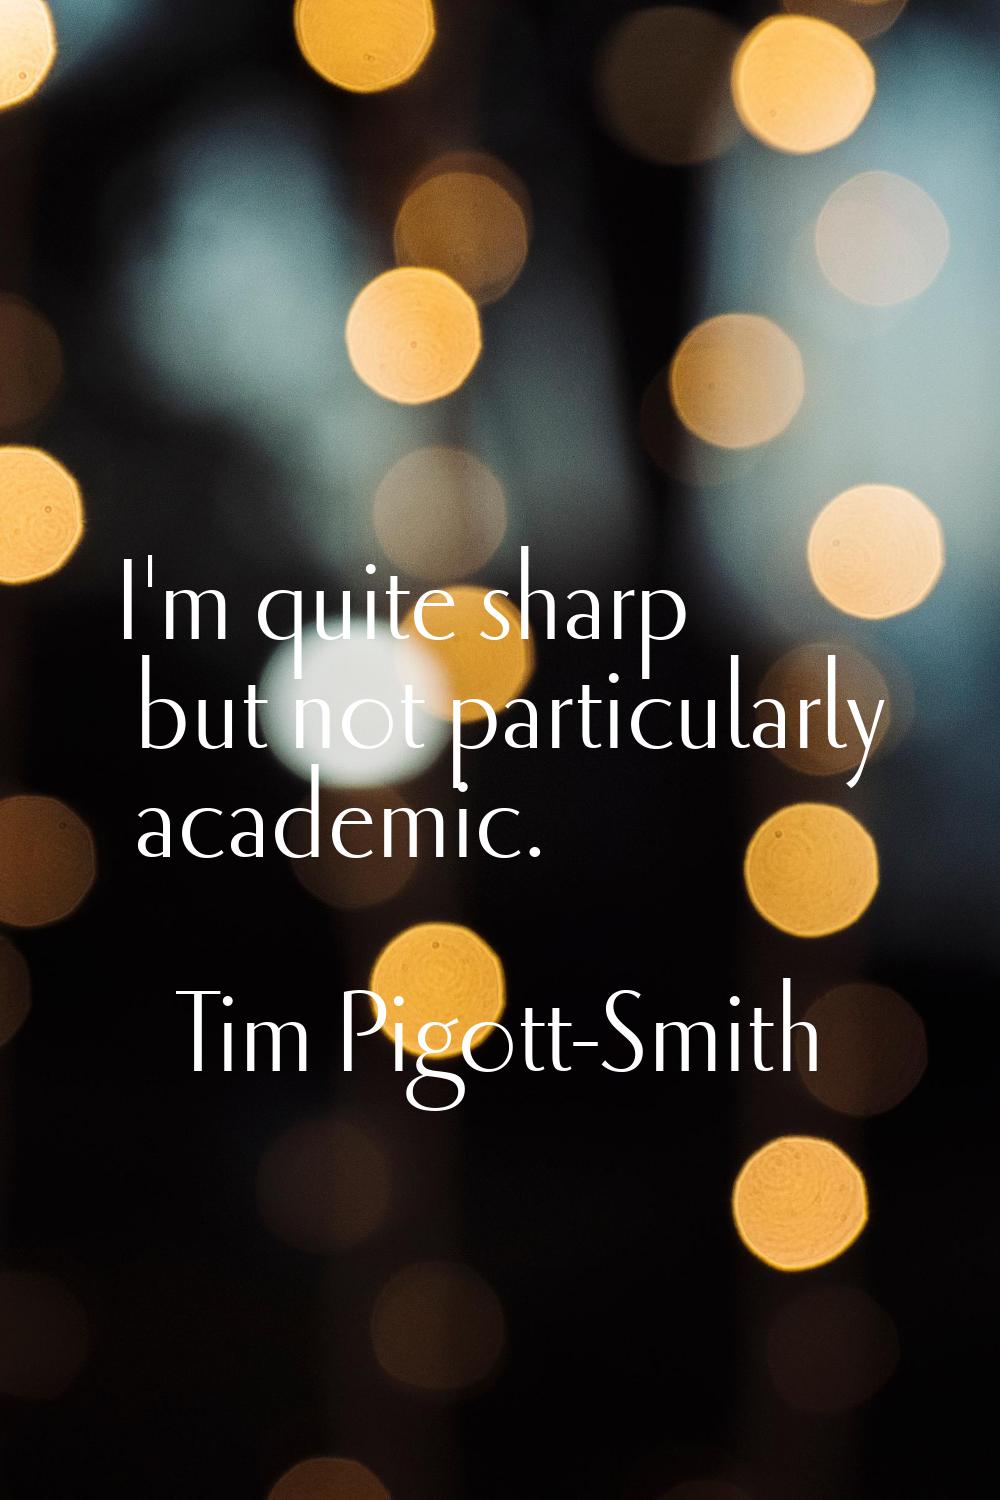 I'm quite sharp but not particularly academic.